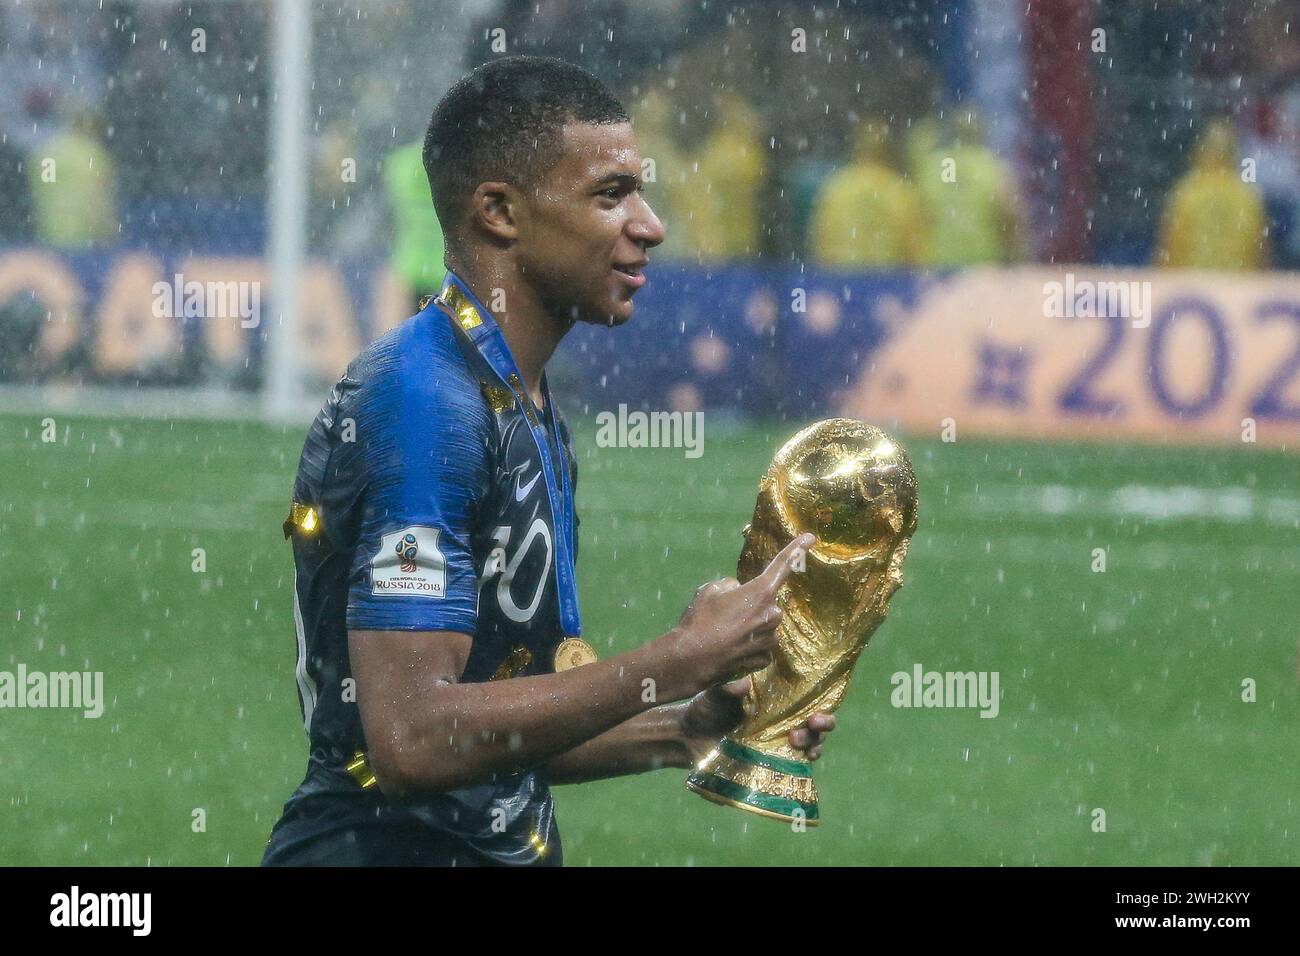 Moscow, Russia. 15th July, 2018. Kylian Mbappe of France celebrates with the trophy during the FIFA World Cup 2018 Final match between France and Croatia at Luzhniki Stadium. Final score: France 4:2 Croatia. (Photo by Grzegorz Wajda/SOPA Images/Sipa USA) Credit: Sipa USA/Alamy Live News Stock Photo